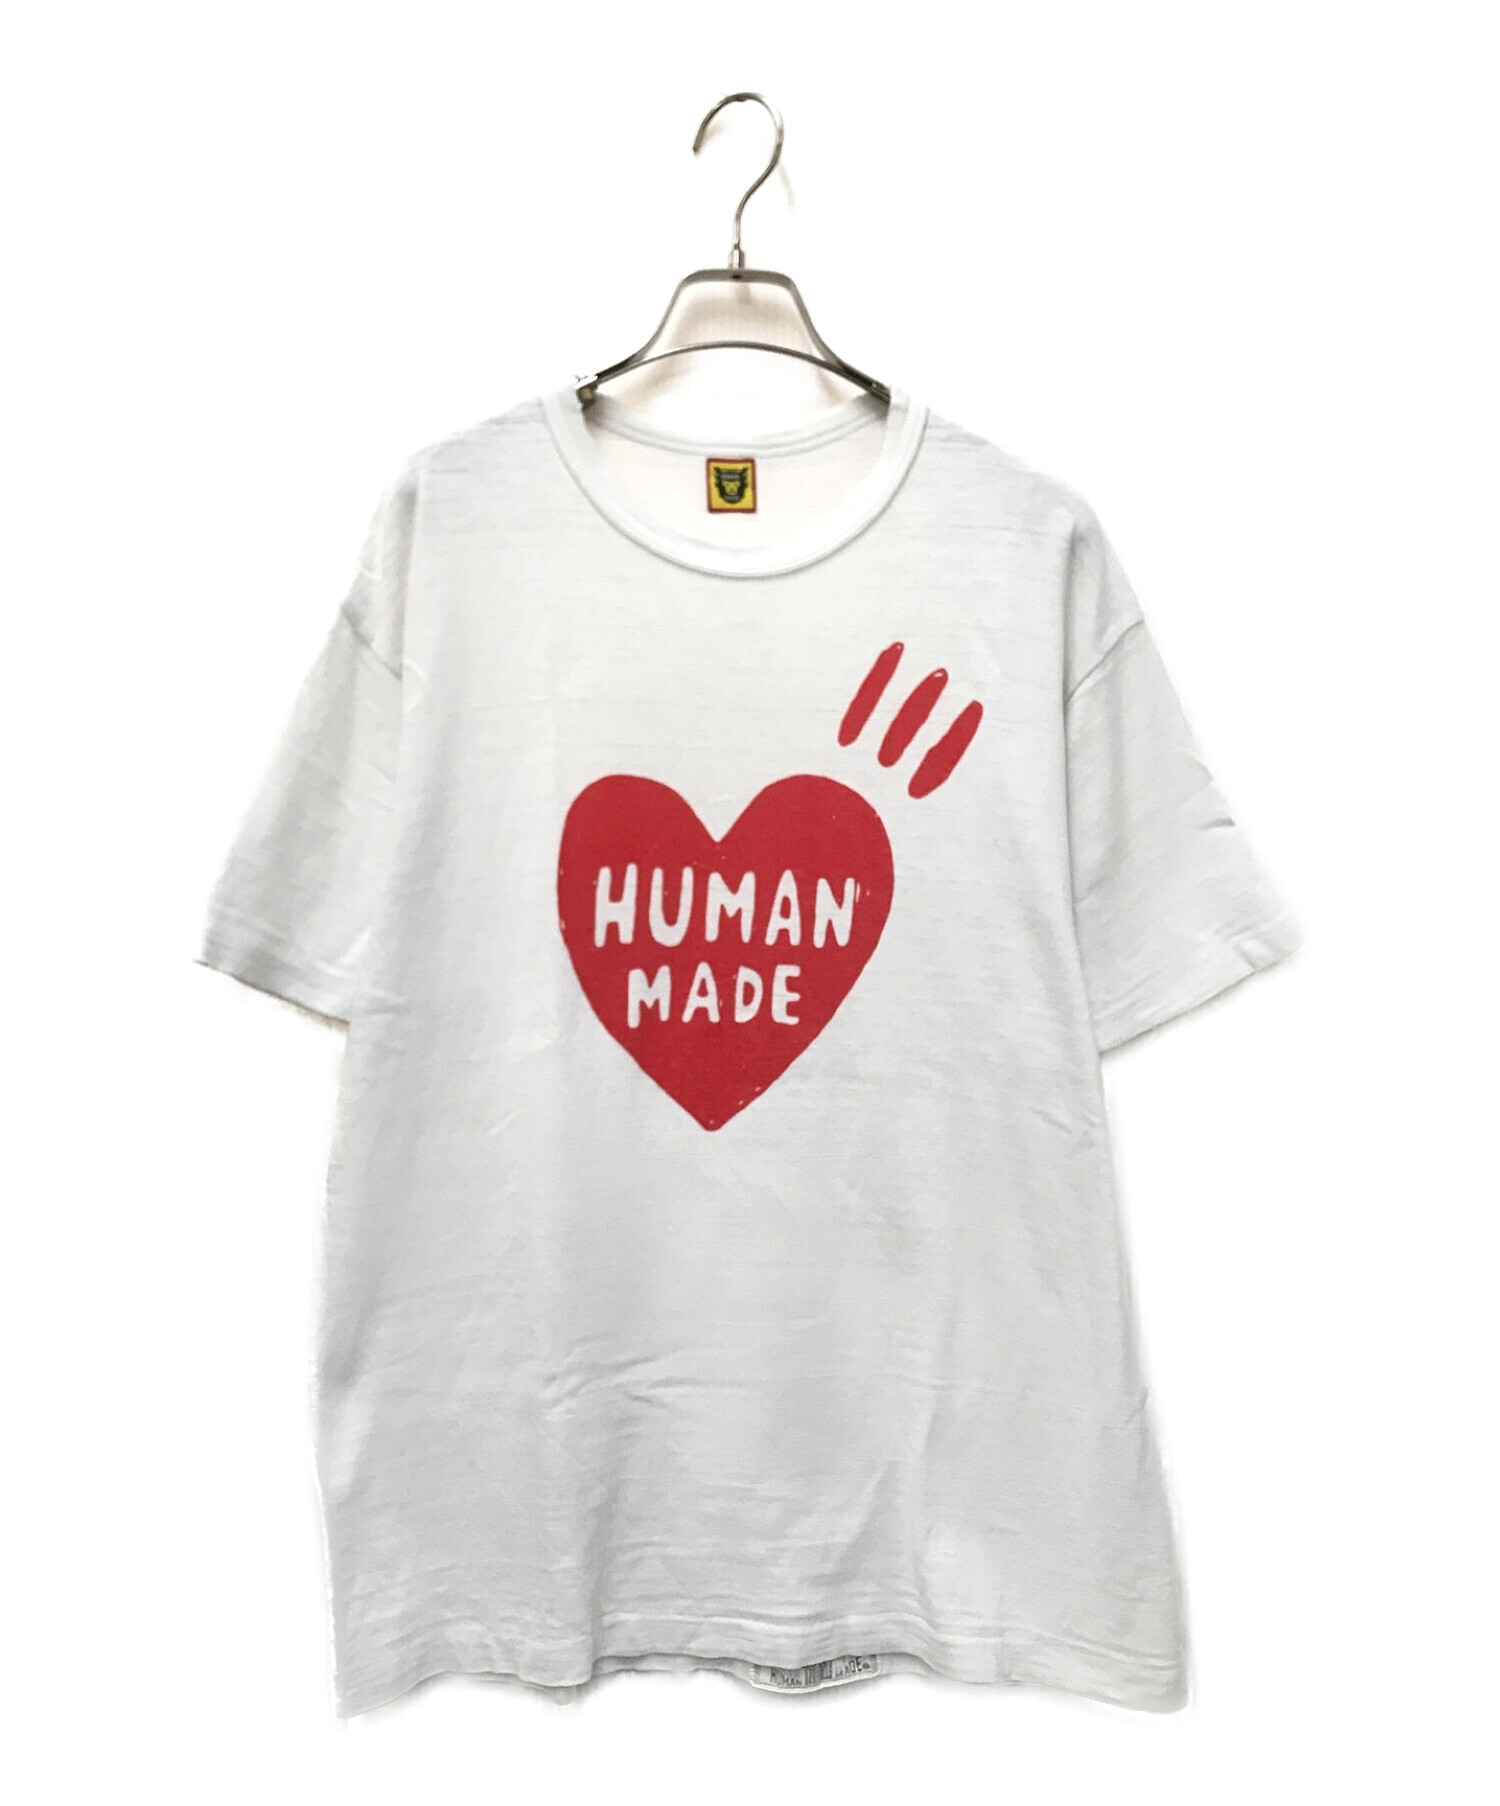 HUMAN MADE　 ハートプリントTシャツ